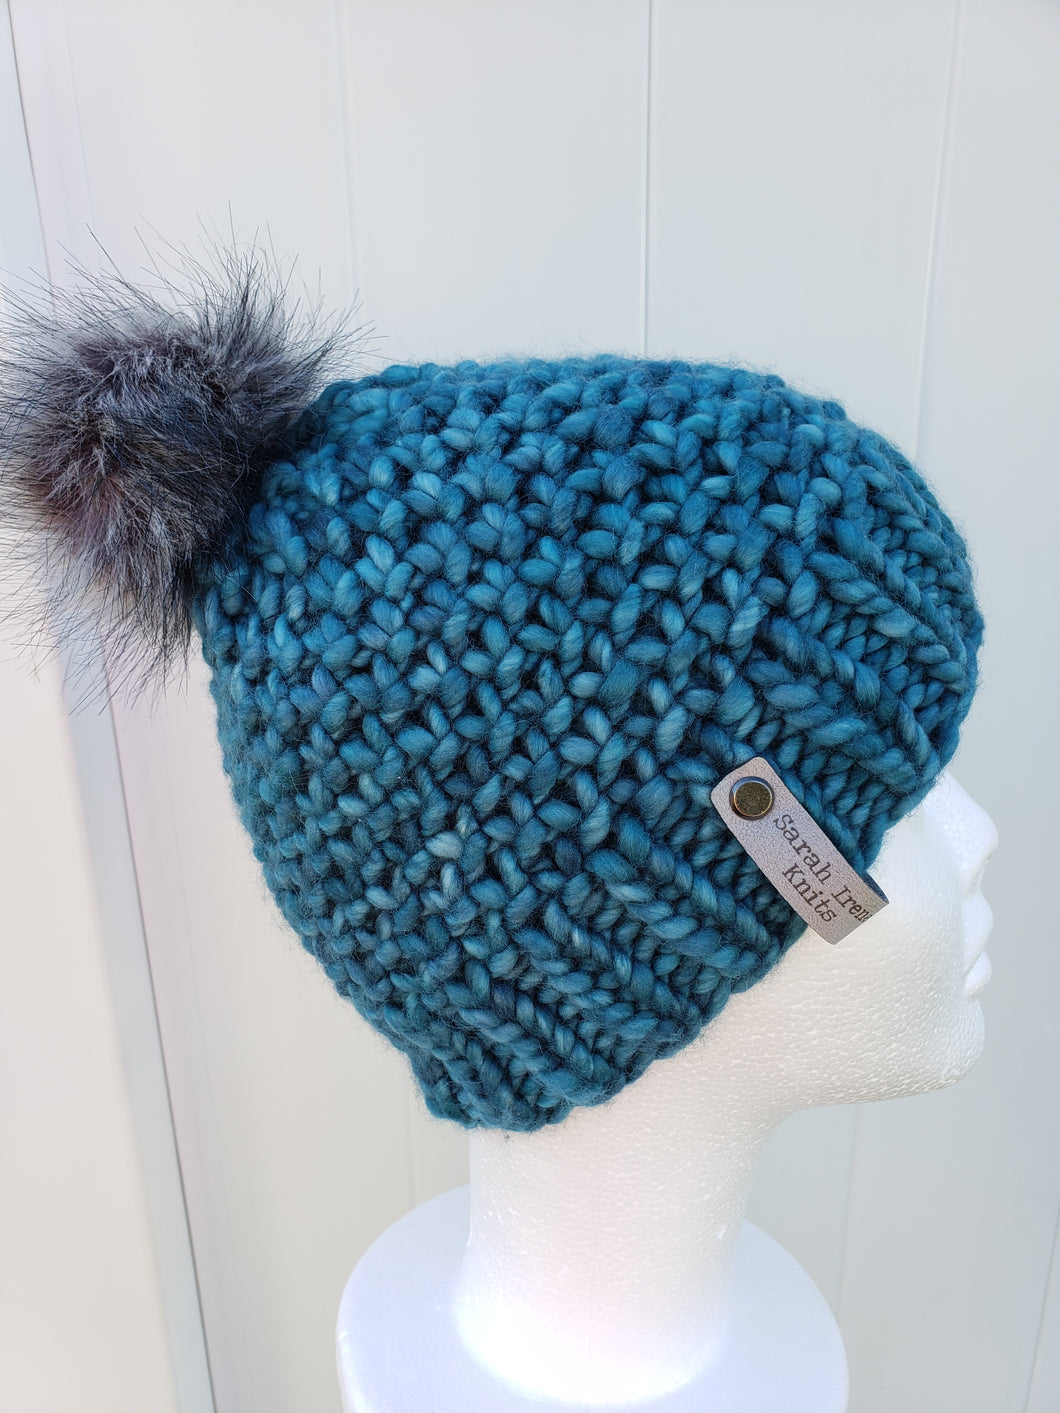 Knobby beanie in teal topped with a faux fur pom.